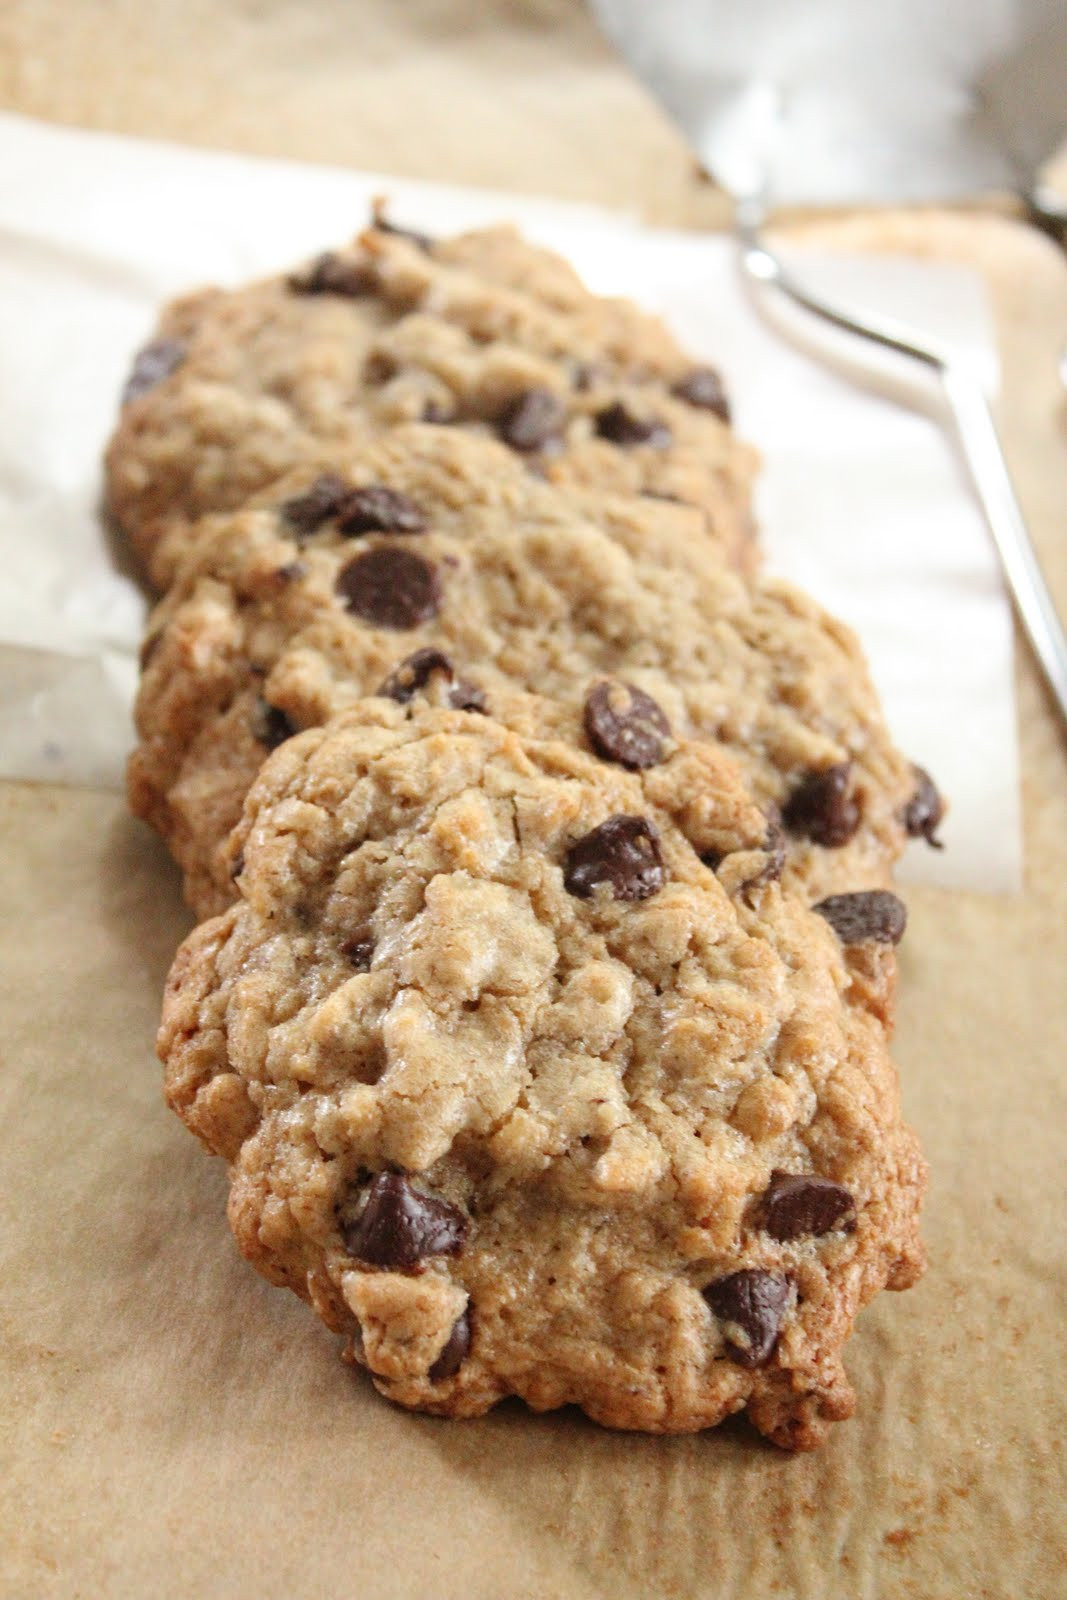 Healthy Oatmeal Chocolate Chip Cookies Recipe
 Ultimate healthier oatmeal and chocolate chip cookies